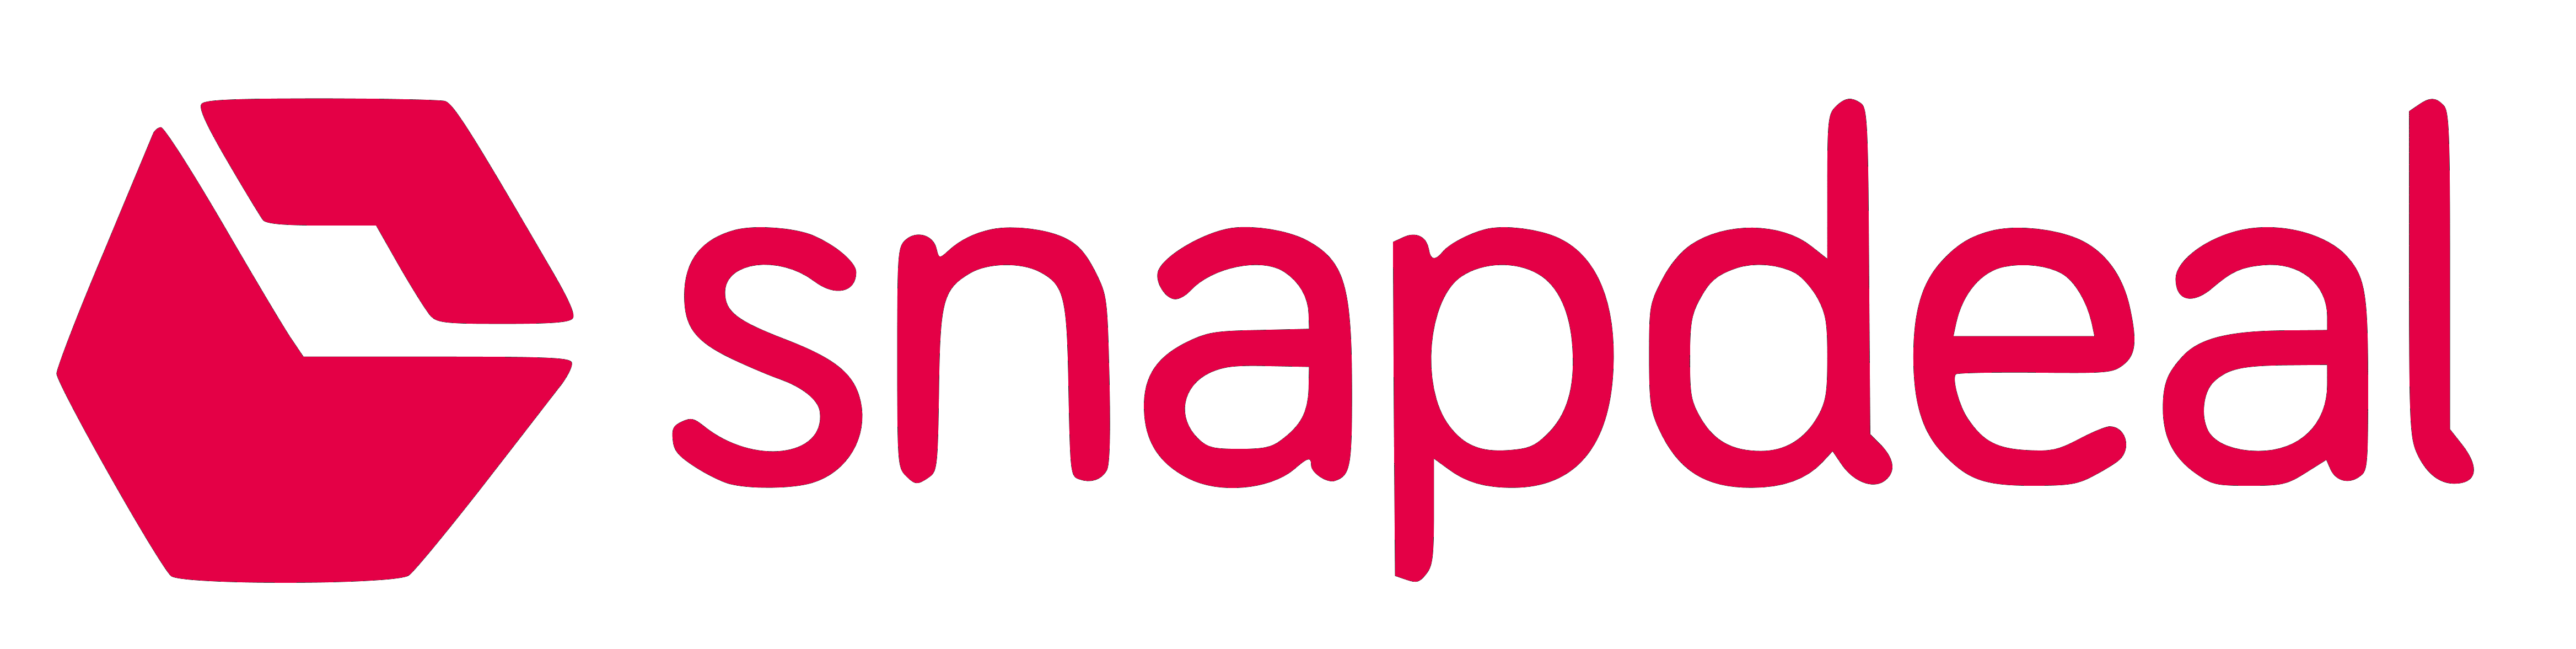 SnapDeal – Logos Download